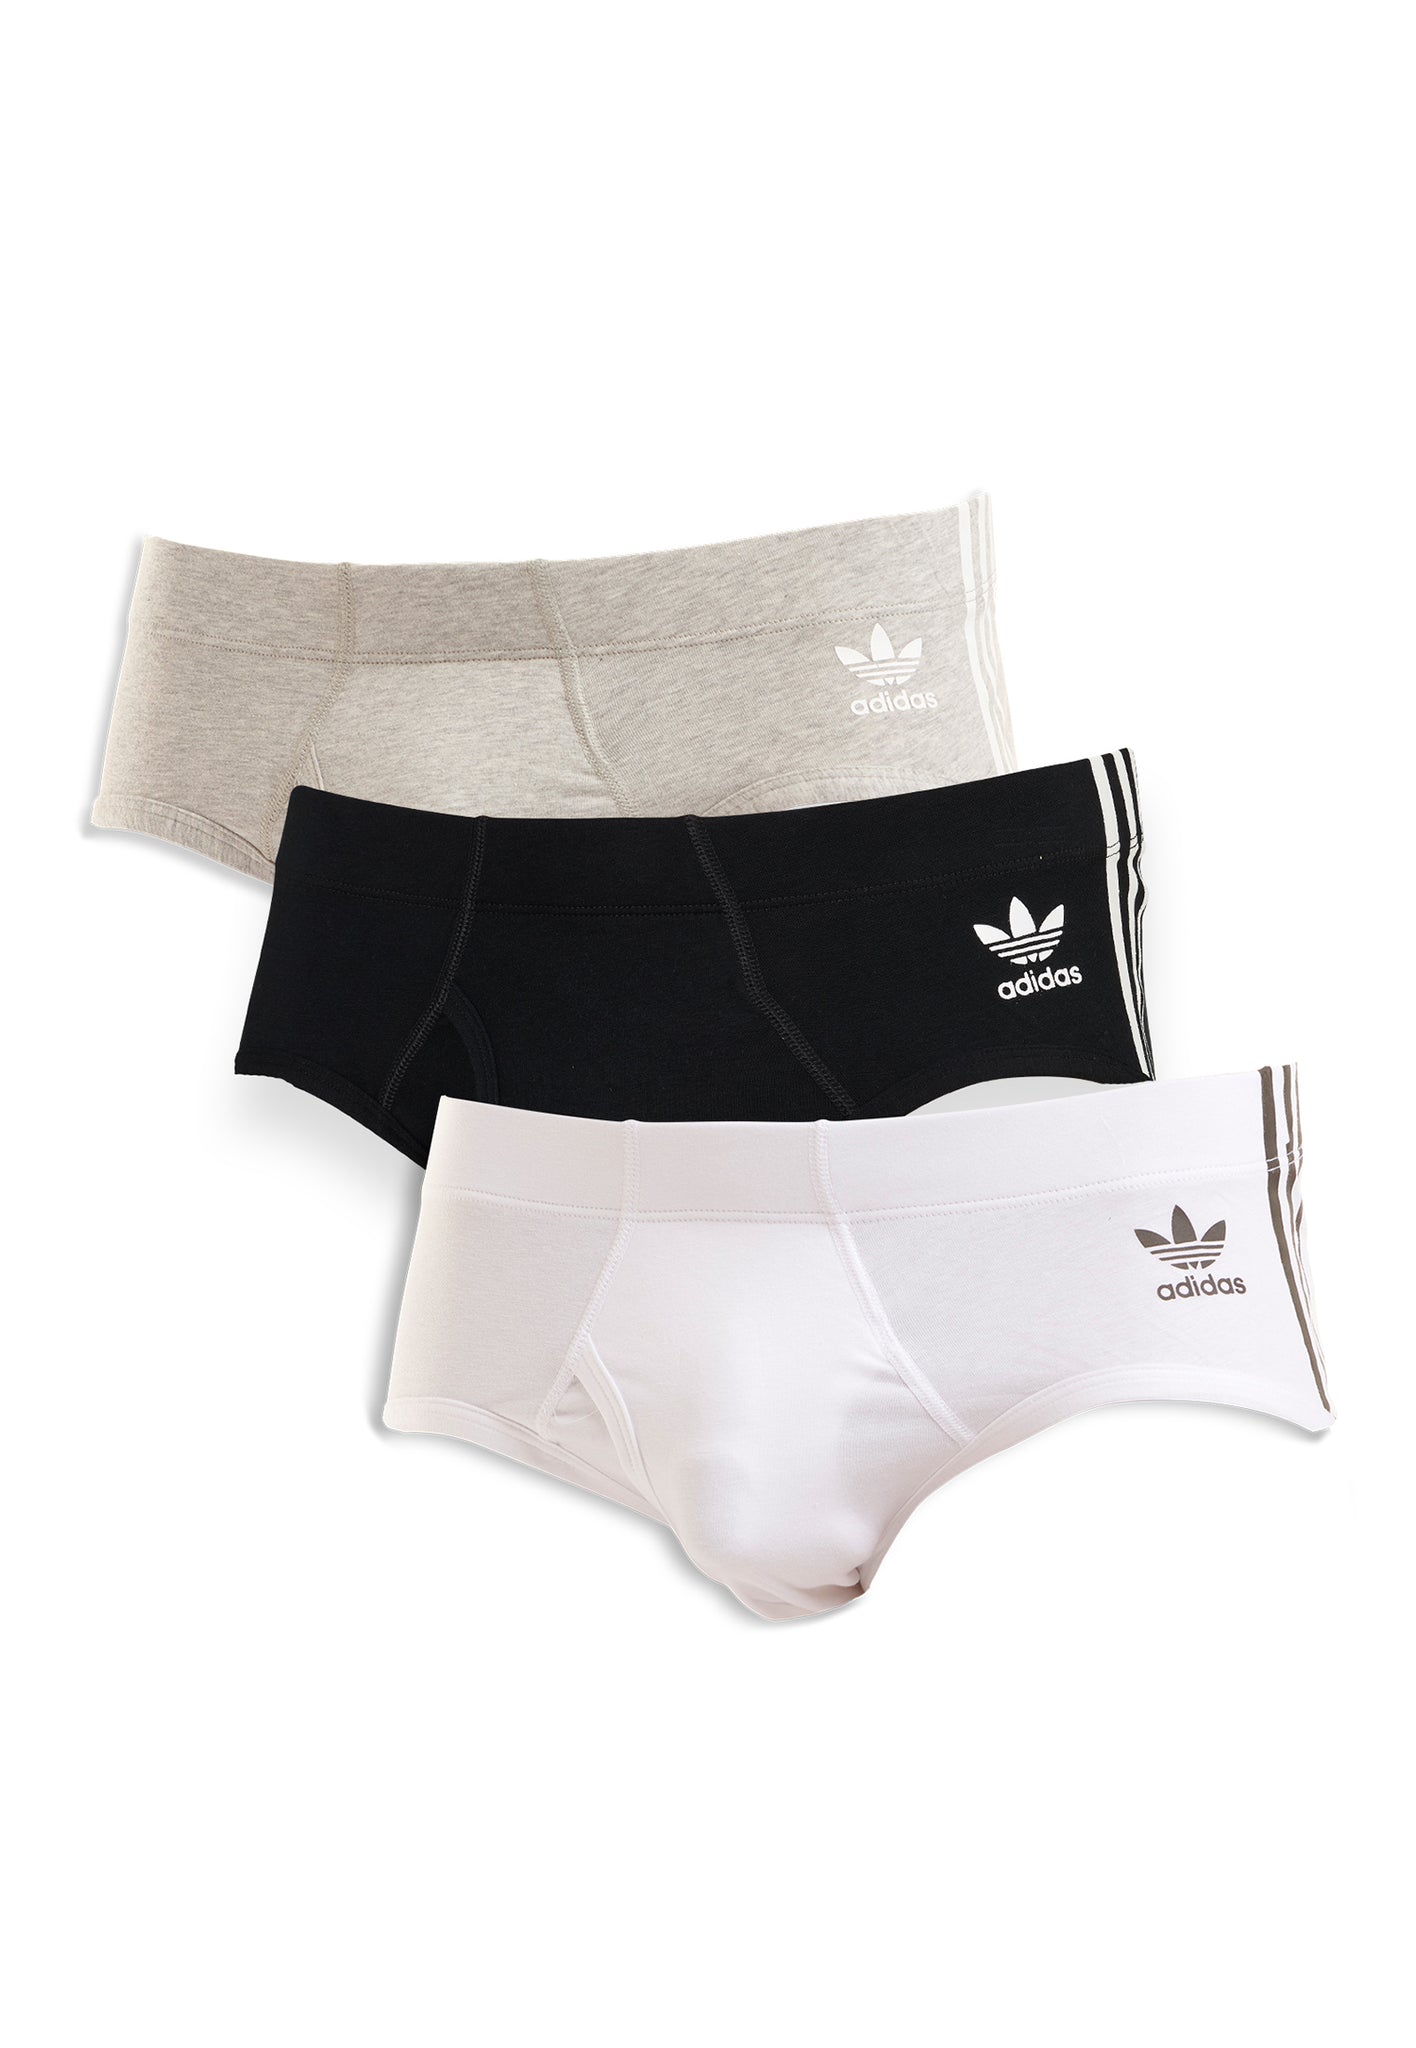 adidas Womens Seamless Brief Breathable Comfort Color Panty 3-Pack, Large  US, Vrjac/Wht/Nindg, Large